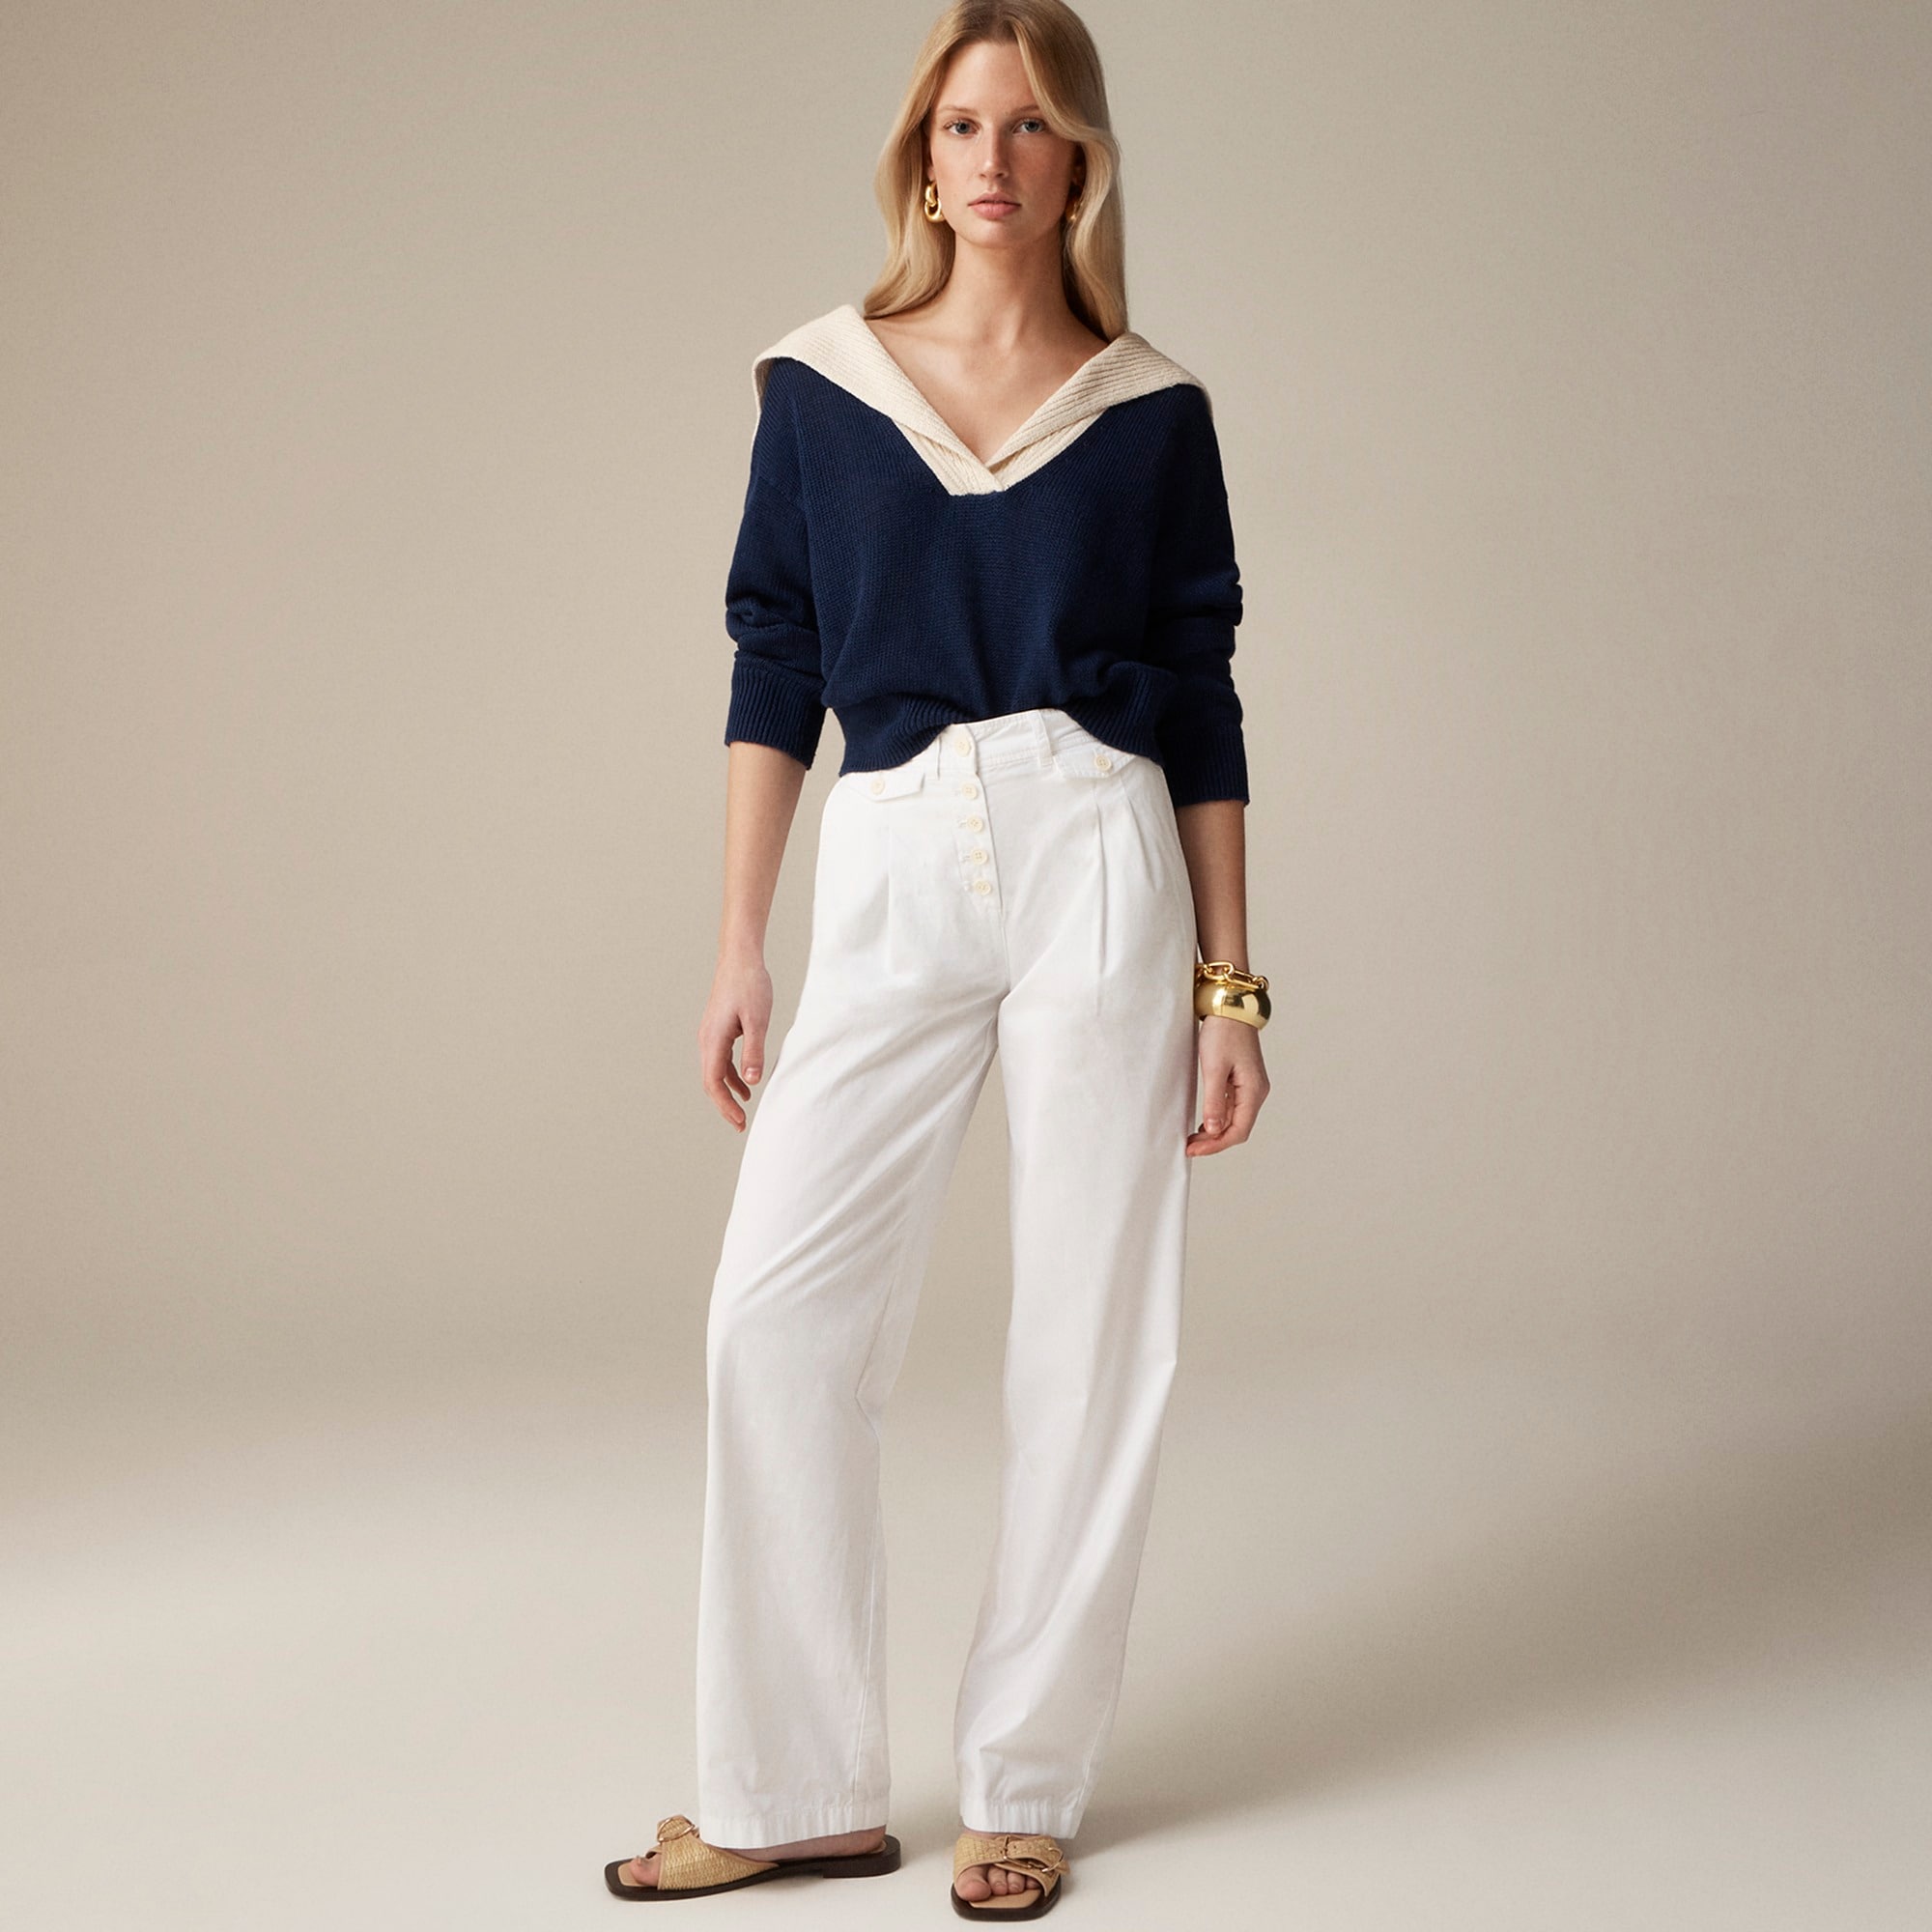  Petite pleated button-front pant in chino